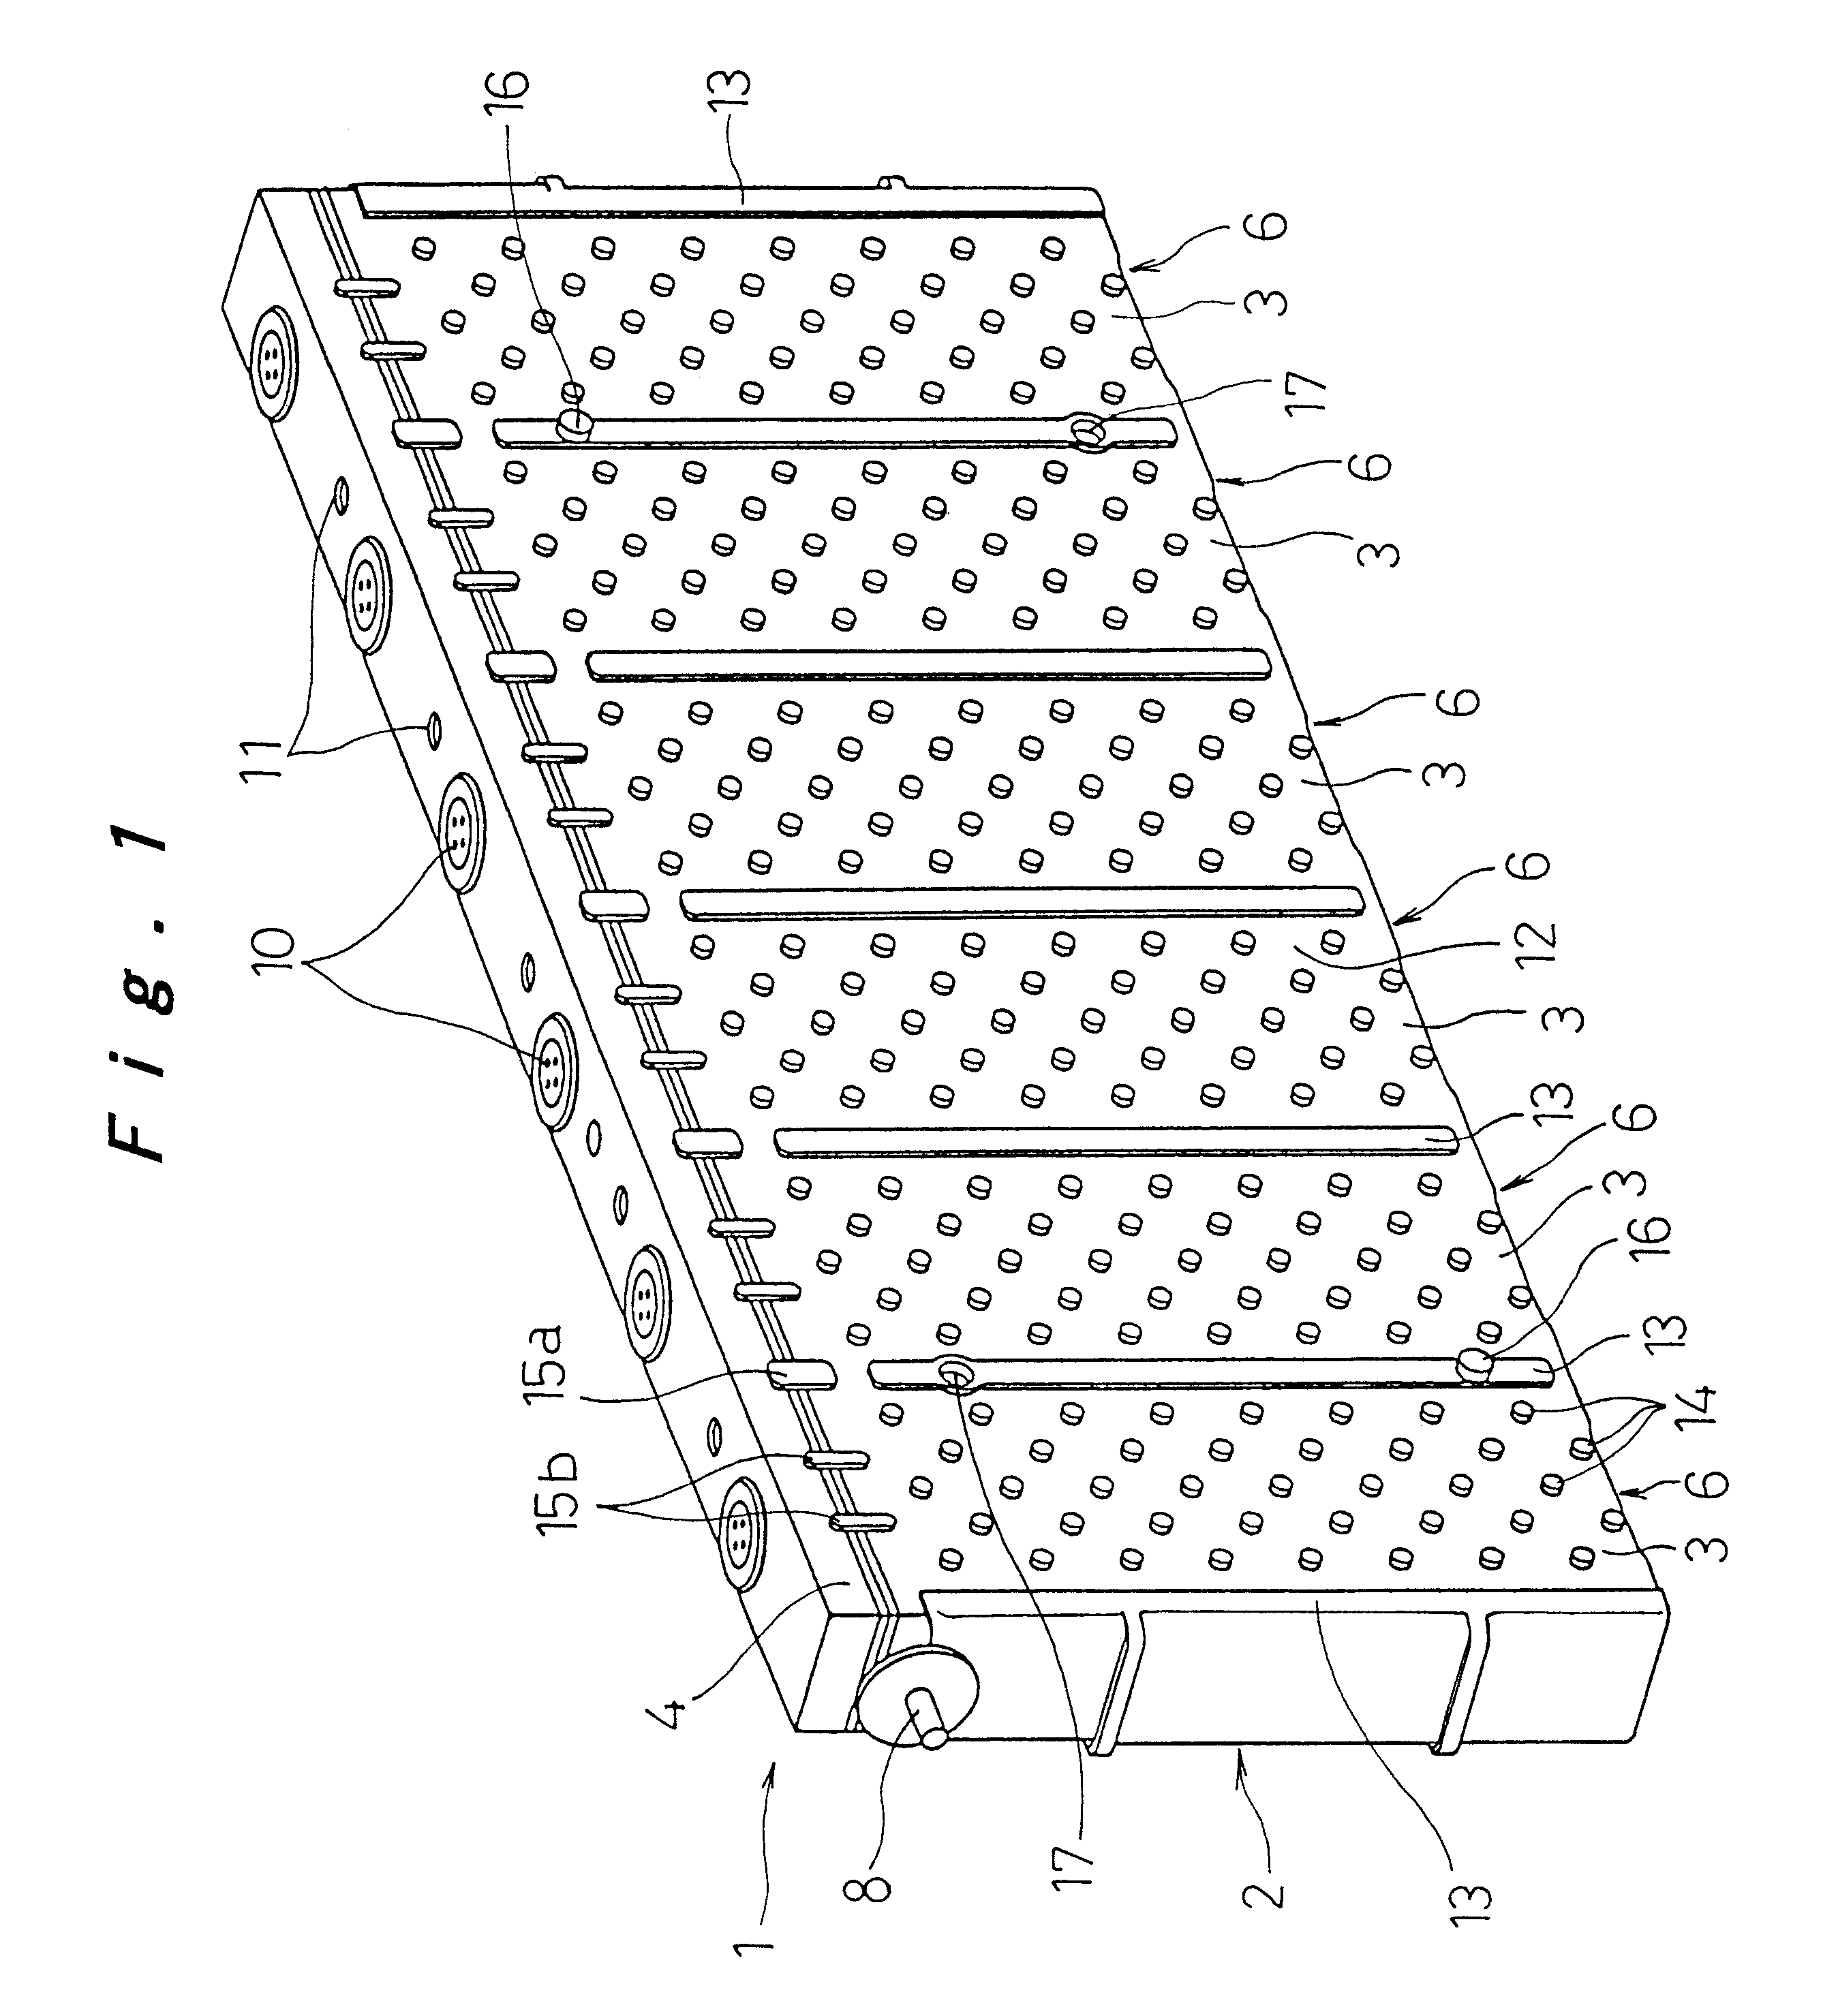 Battery module having a plurality of interconnected batteries